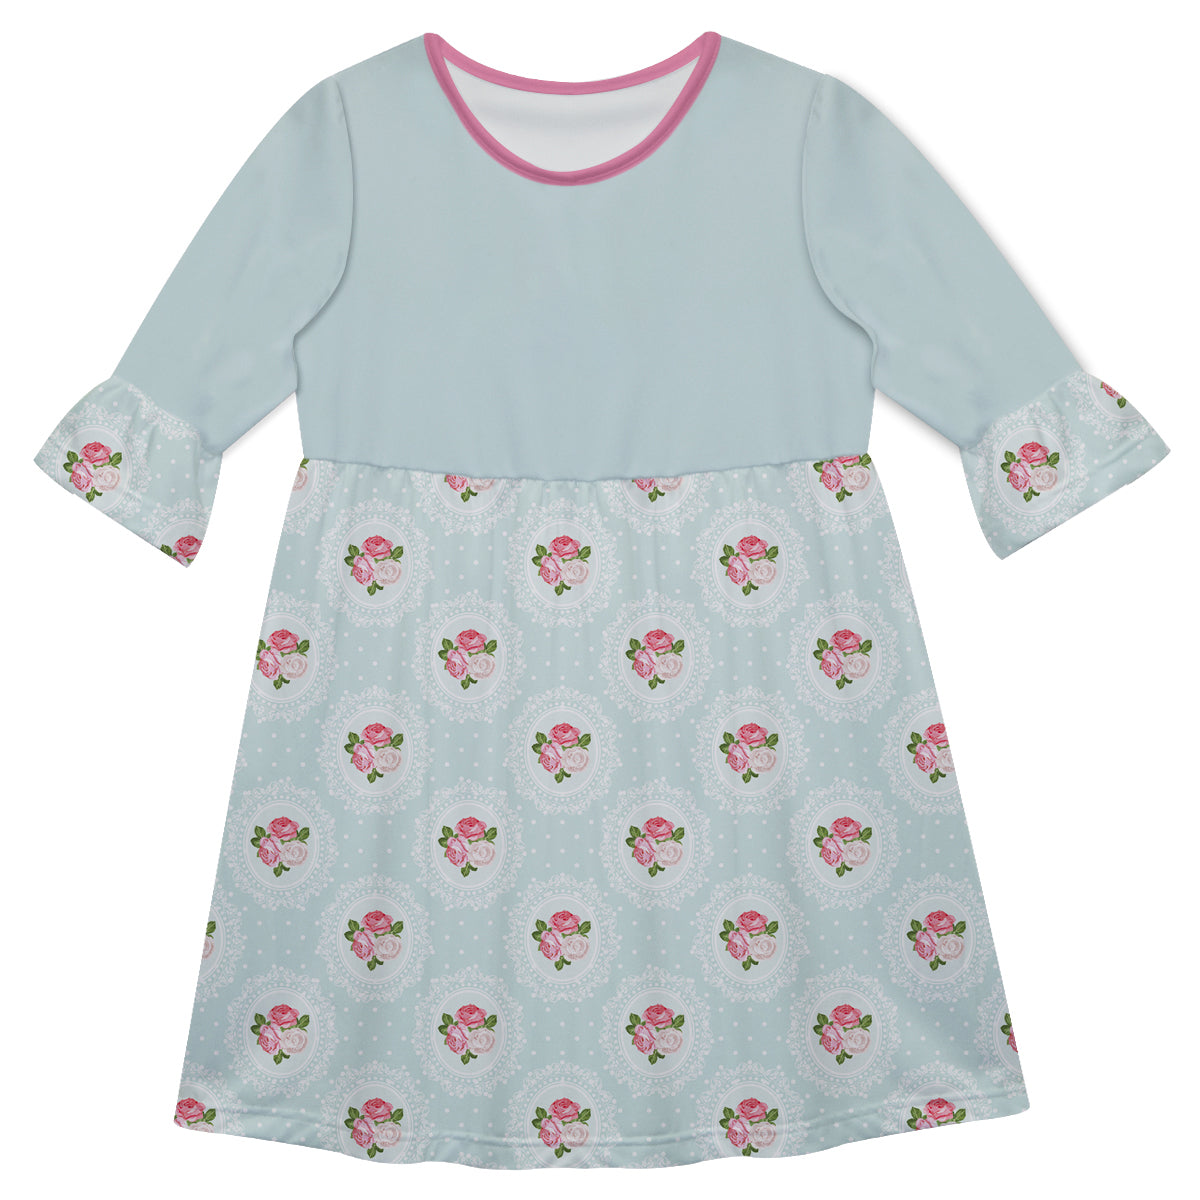 Girls light blue and pink floral dress with name - Wimziy&Co.